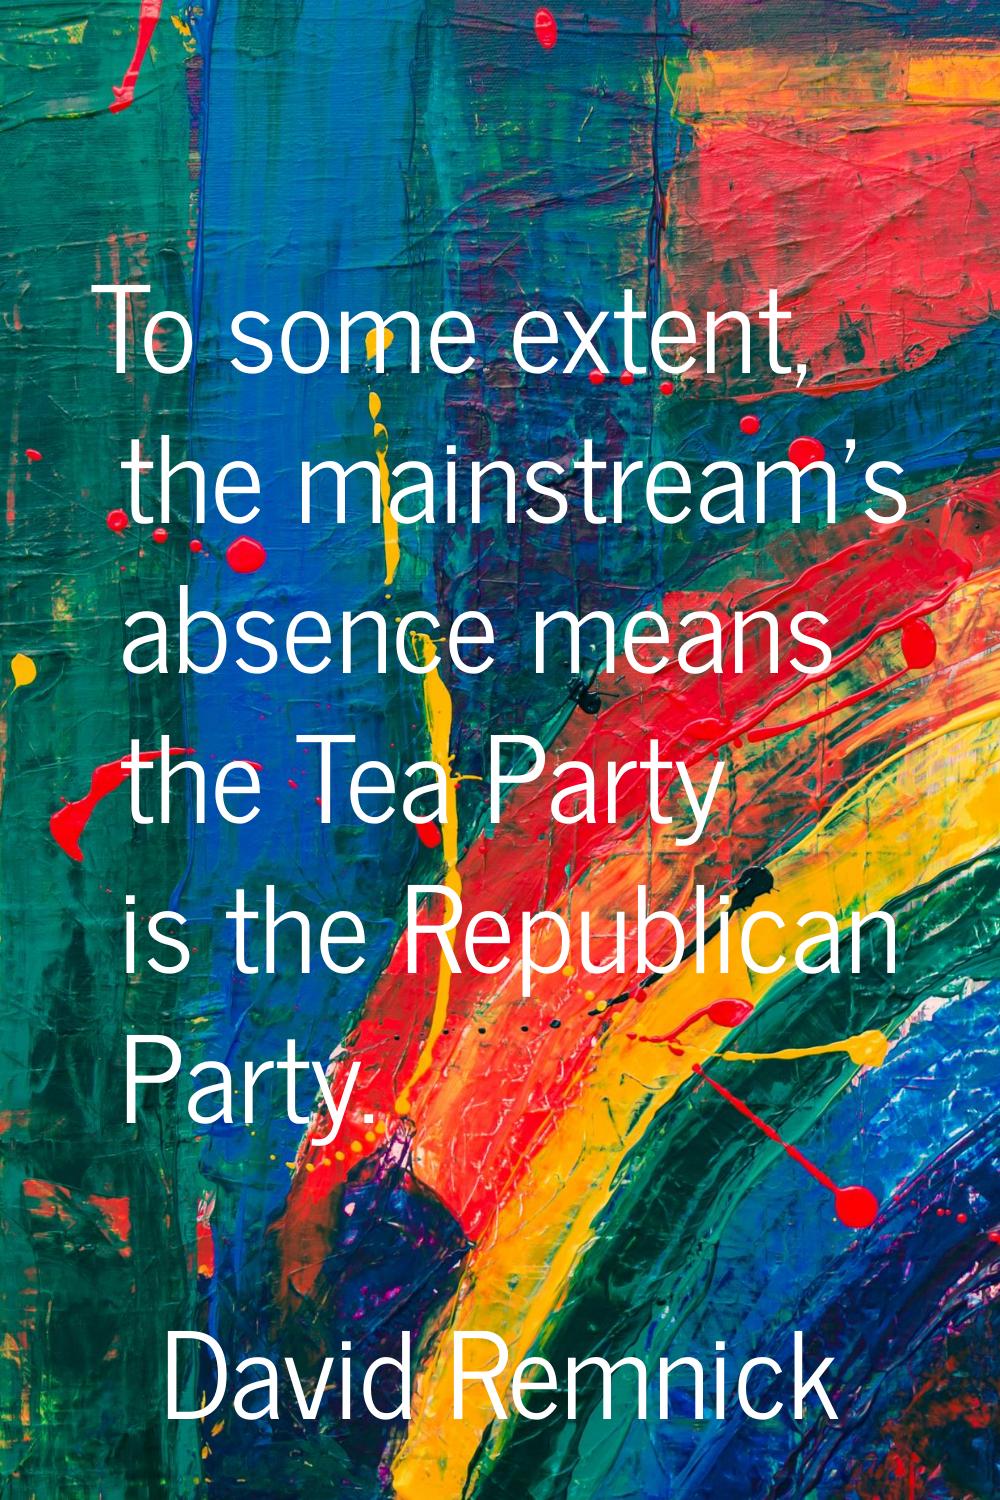 To some extent, the mainstream's absence means the Tea Party is the Republican Party.